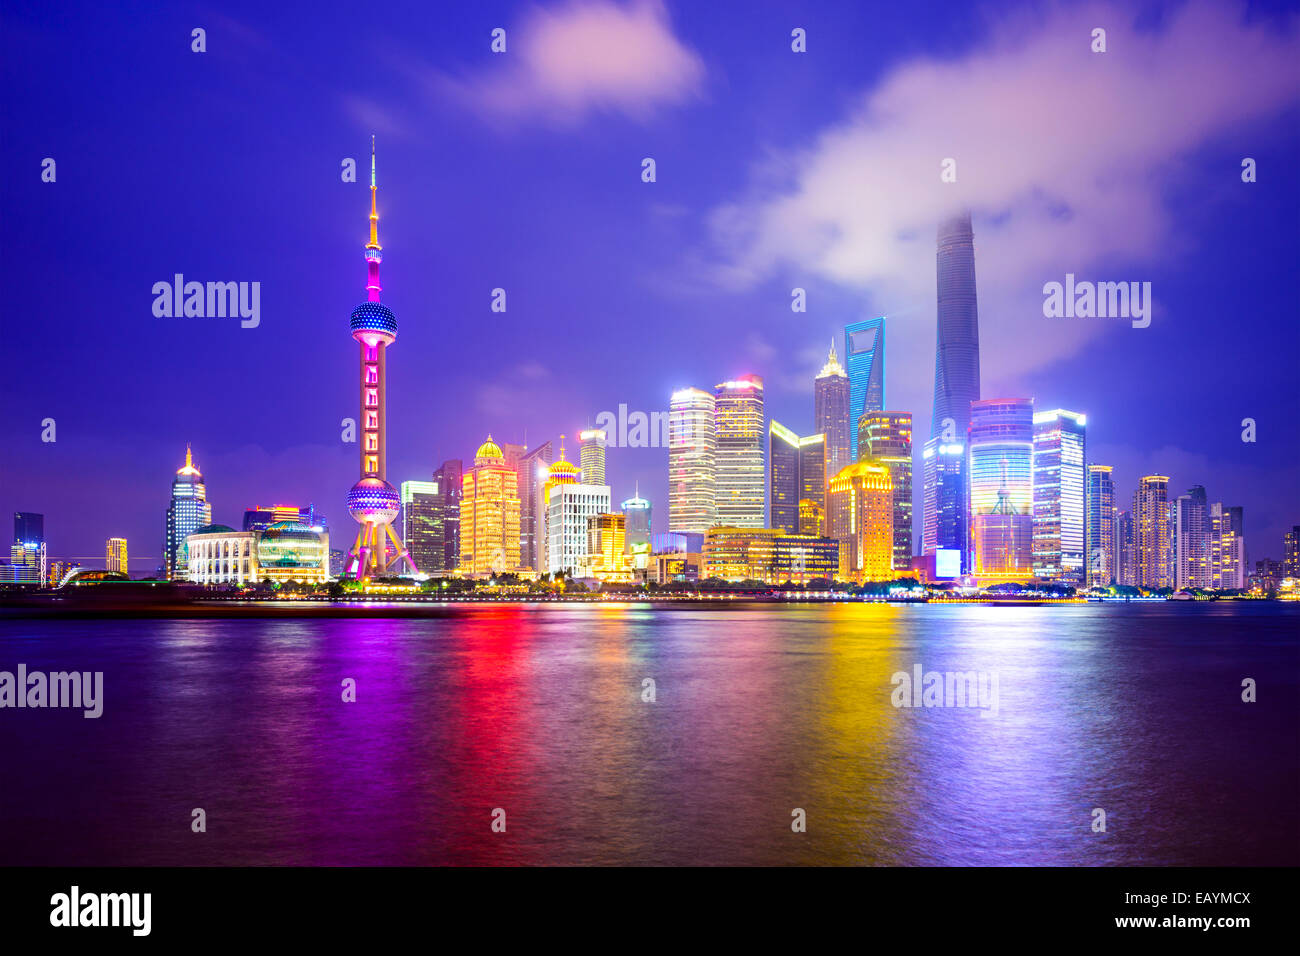 Shanghai, China city skyline of the Pudong Financial District. Stock Photo